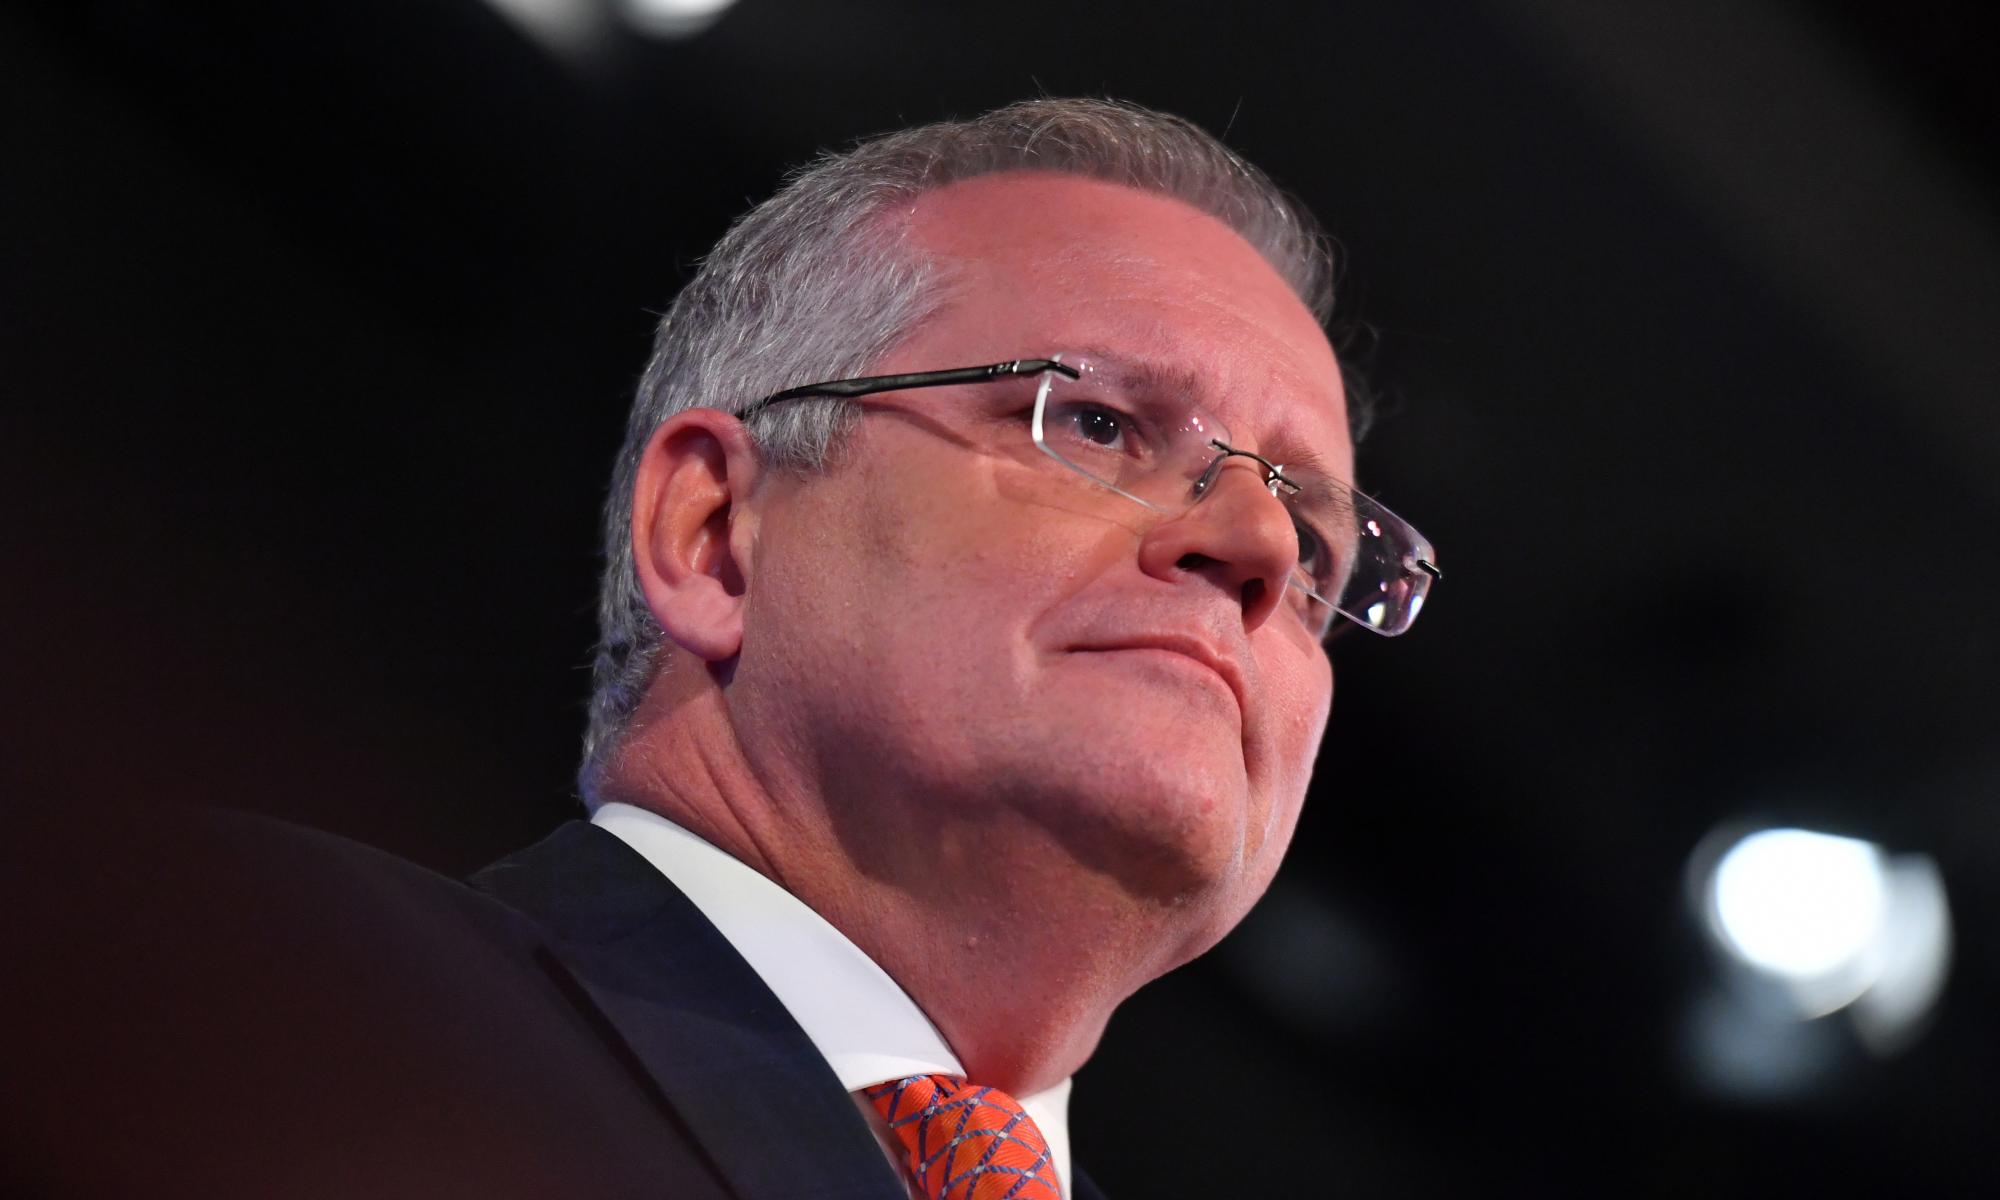 Australia already 'carrying its load' on emissions and must adapt to warmer climate, PM says